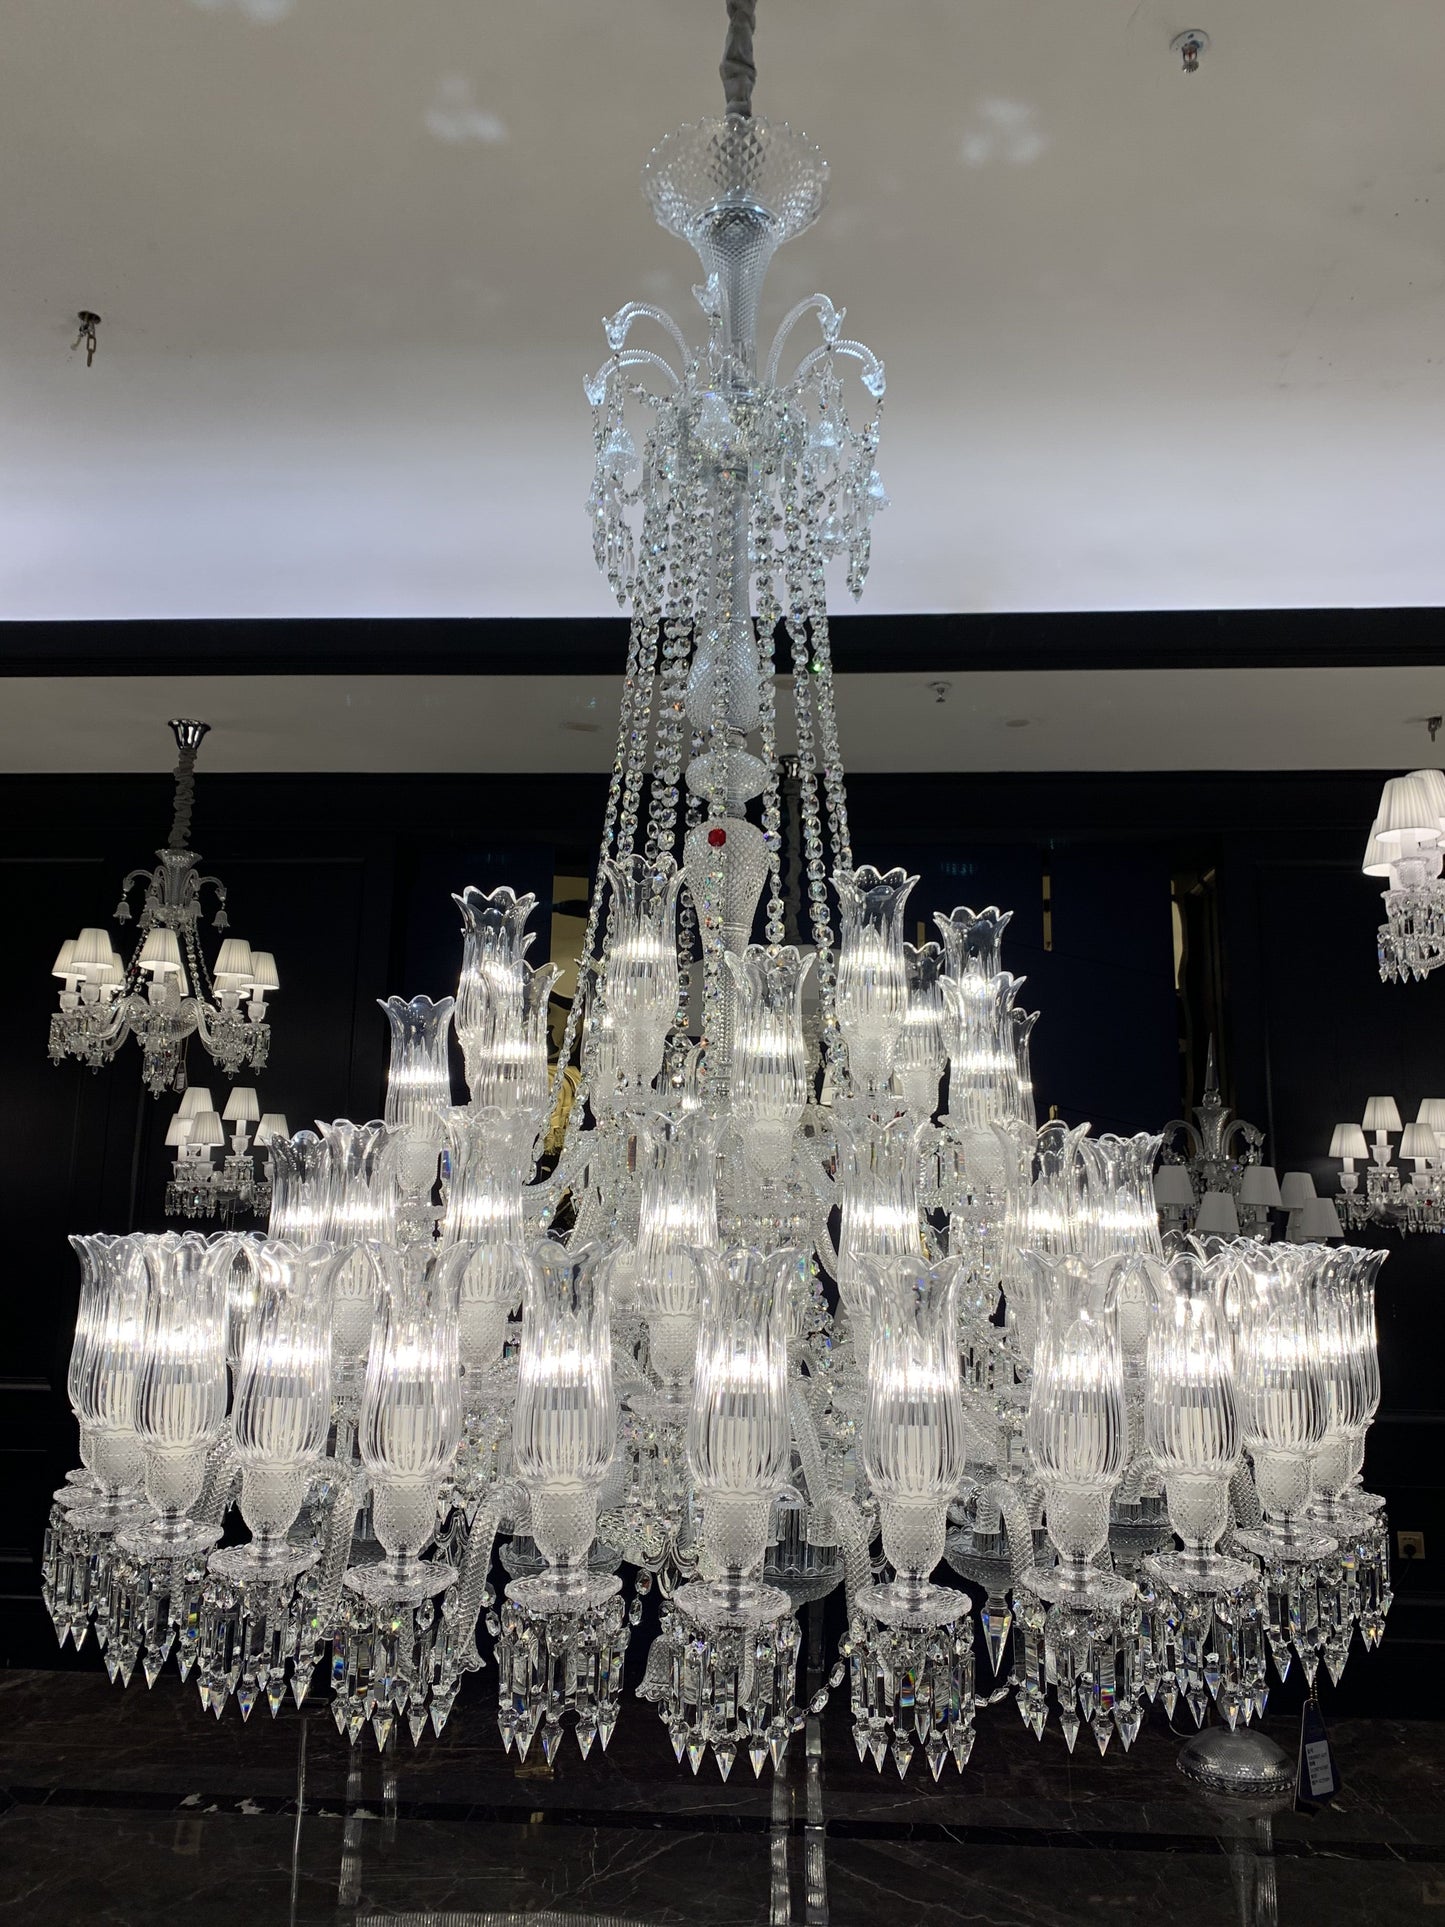 Extra Large French Multi-layer Flower Branch Crystal Chandelier Chrome Crystal Light for Foyer/Stairs/Hallway